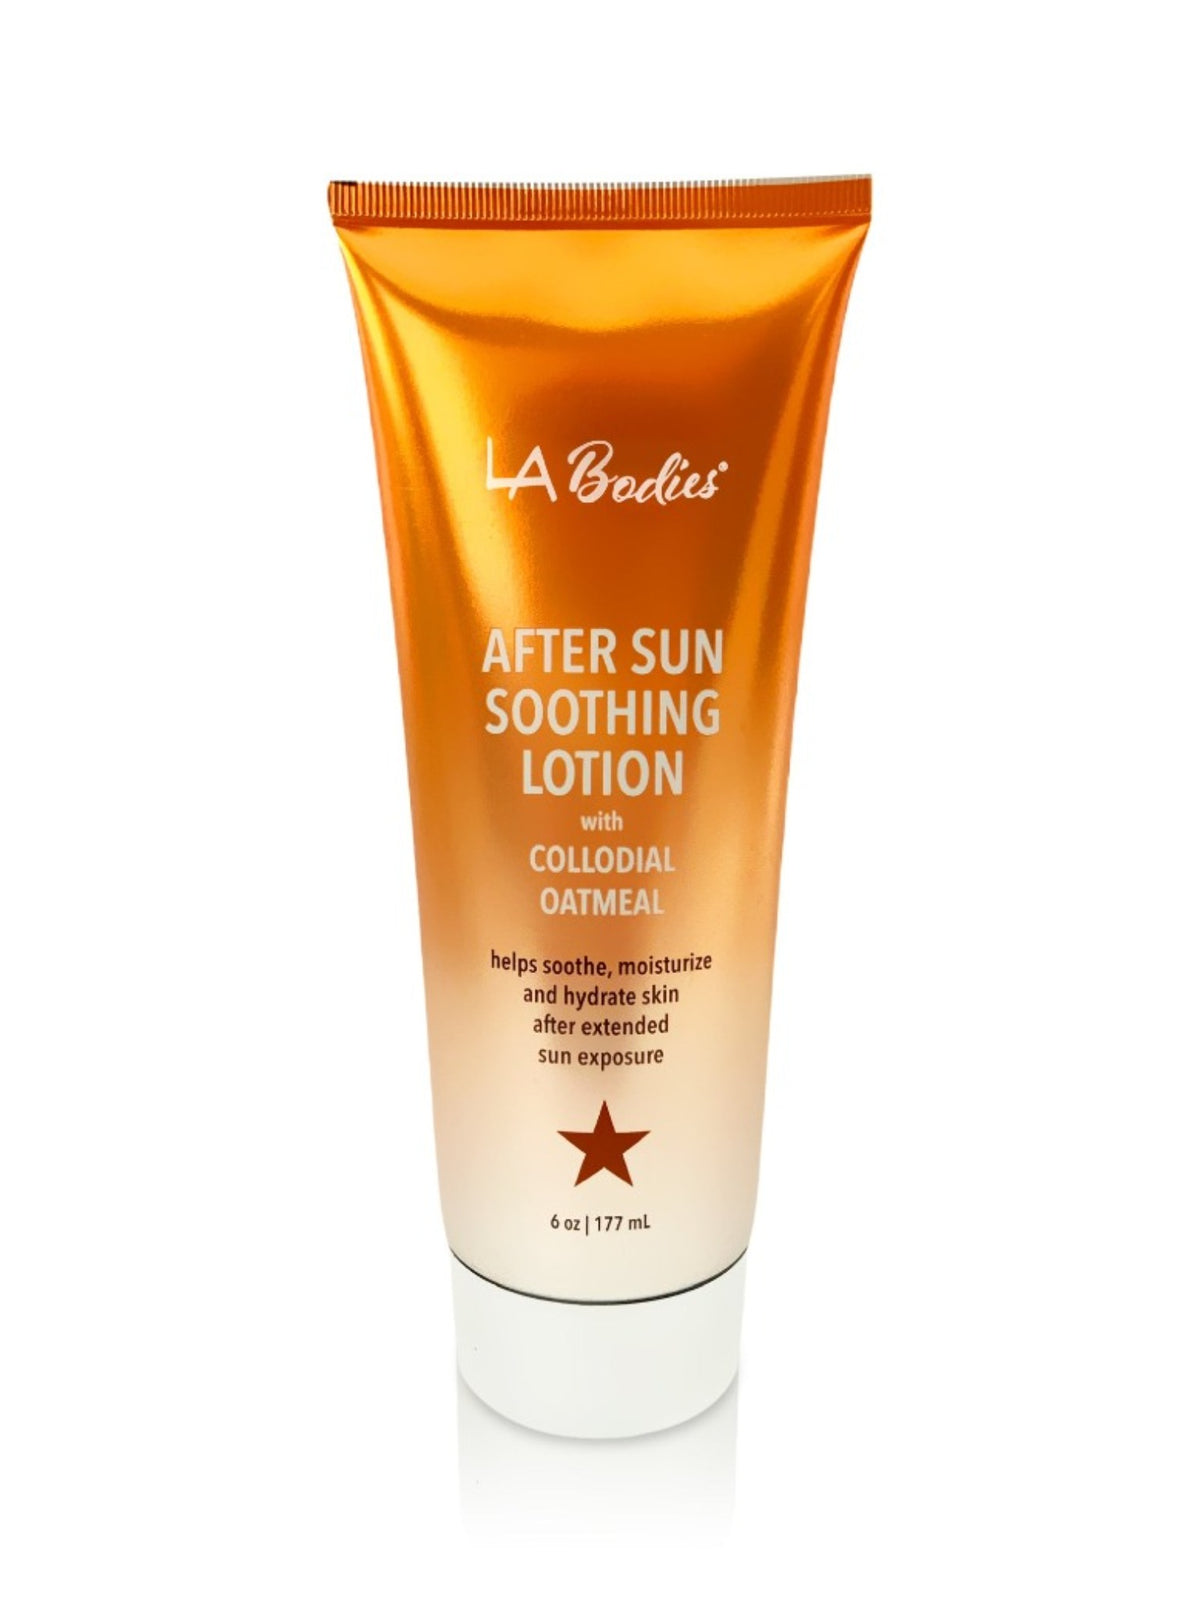 After Sun Soothing Lotion with Colloidal Oatmeal (6 oz)